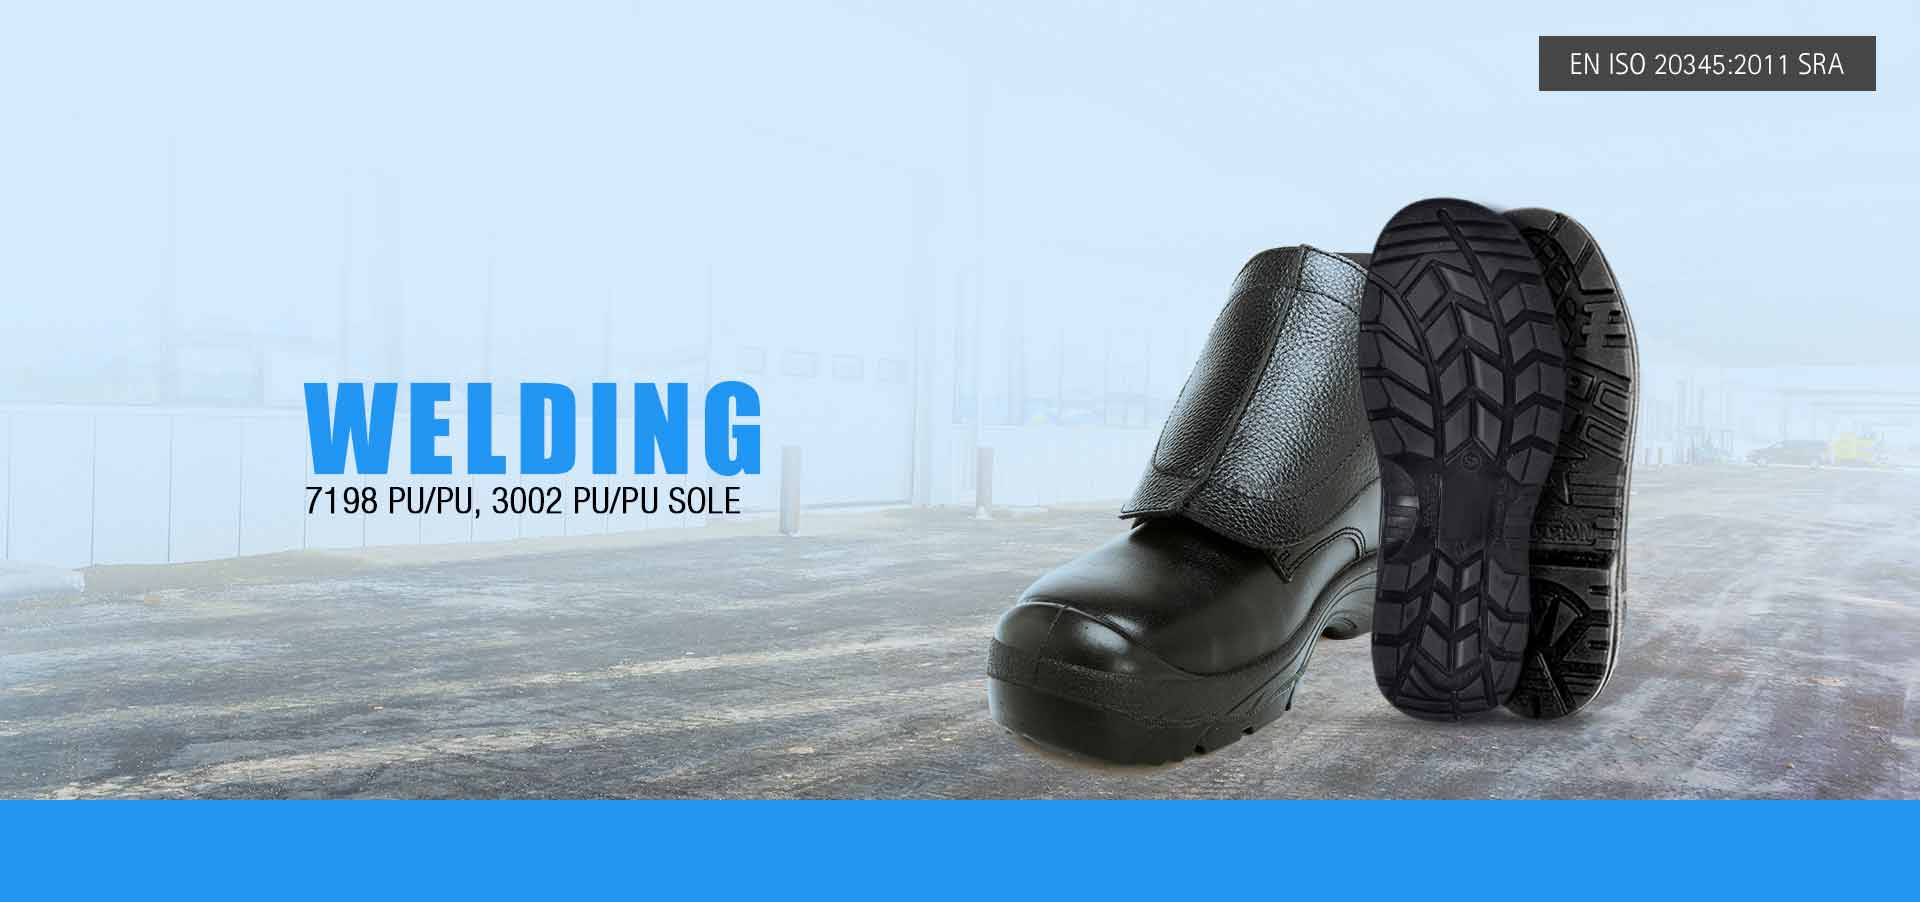 Welder Safety Shoes, Welding Work Boots – Warrior Safety Shoes